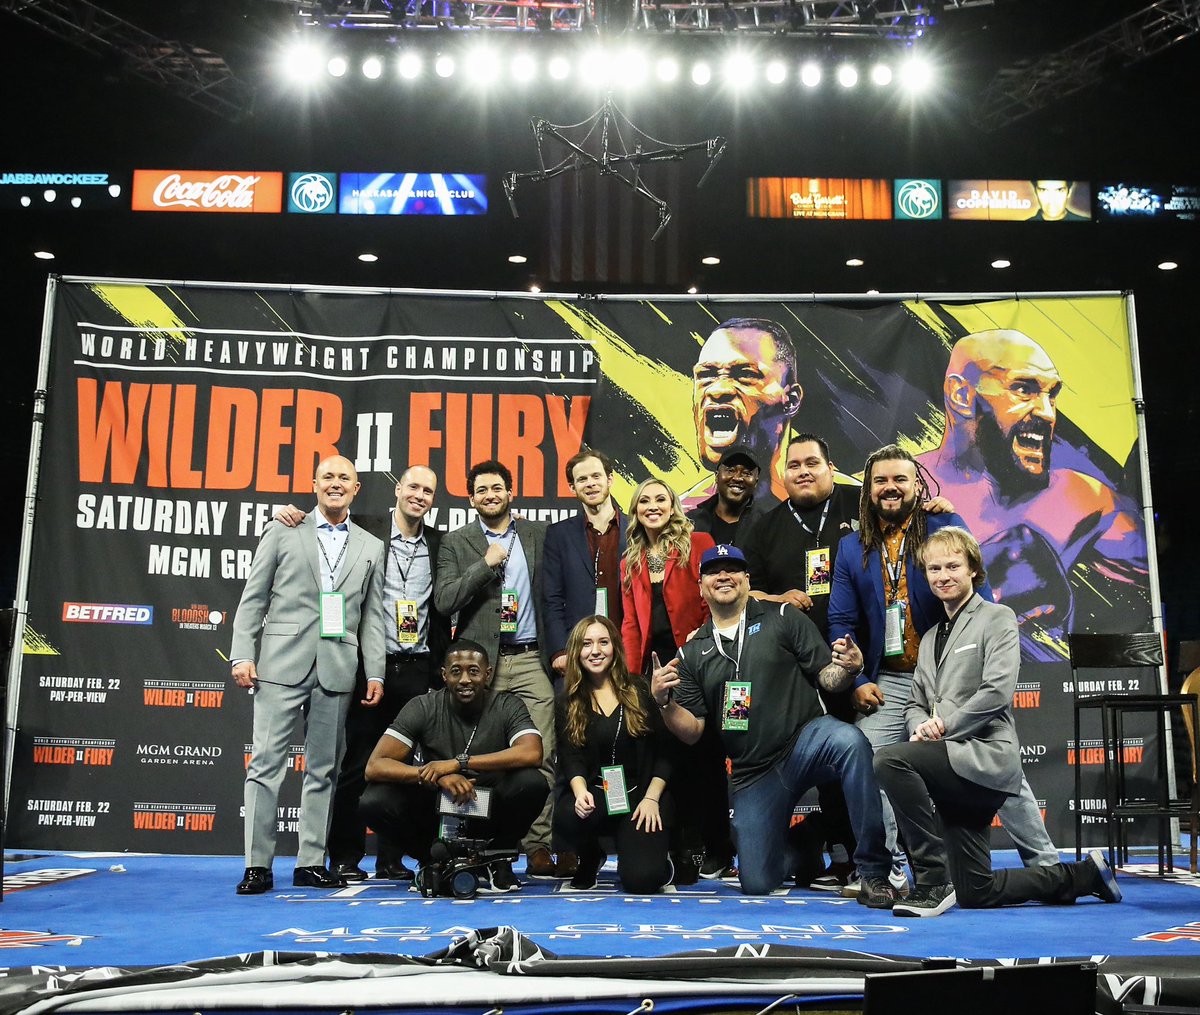 Too exhausted to think of words. Just wow.

#WilderFury2 | (some of) #TeamTopRank